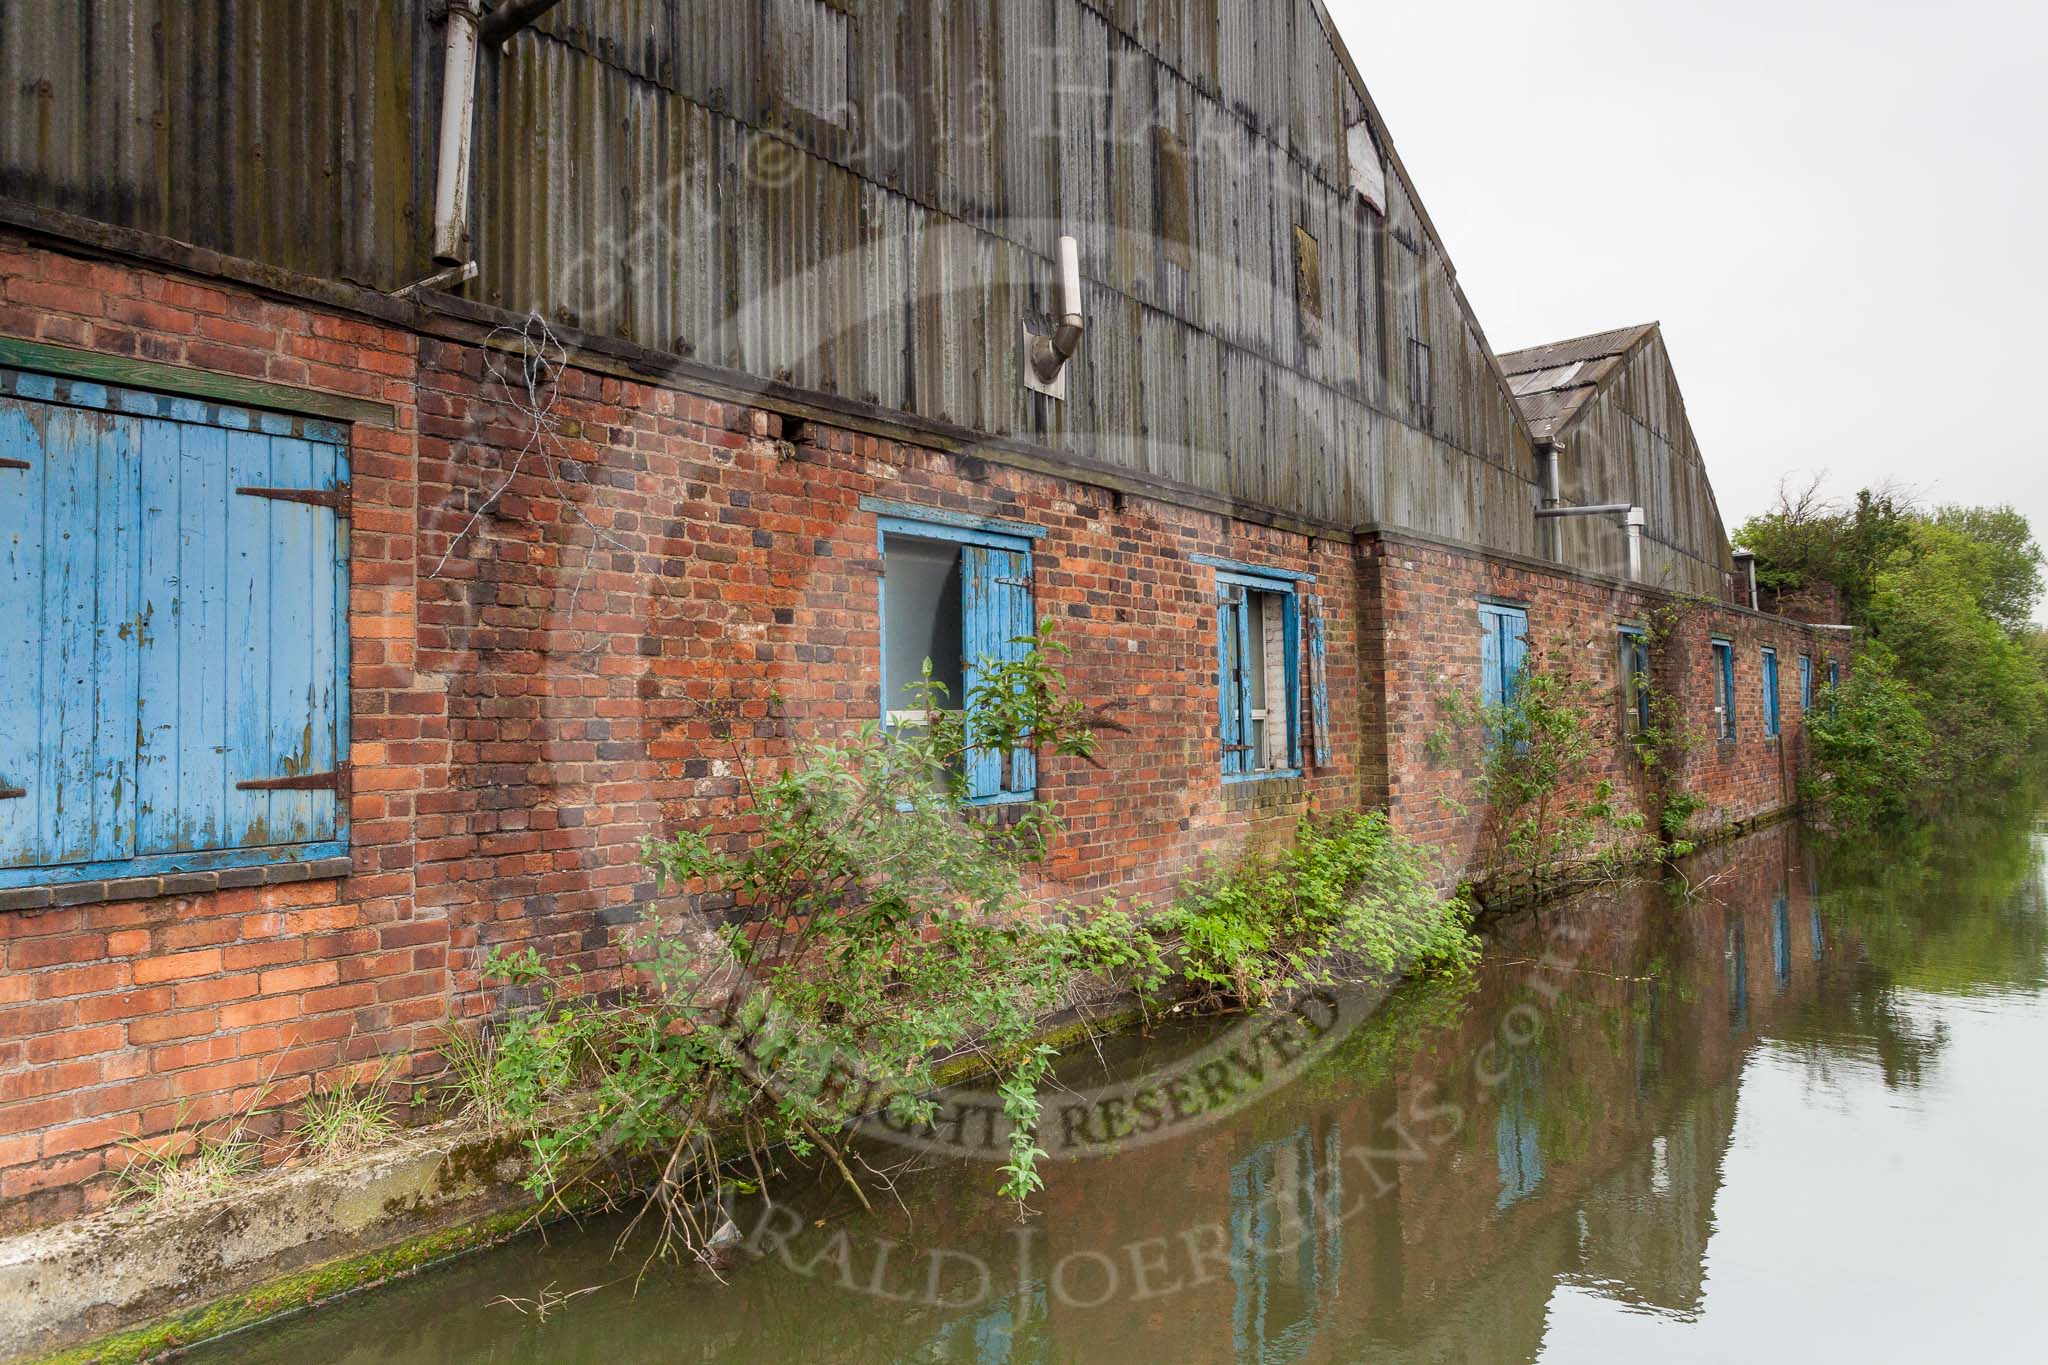 BCN 24h Marathon Challenge 2015: An old factory at the BCN Engine Arrm that seems to be in use, despite the slightly derelict state.
Birmingham Canal Navigations,



on 23 May 2015 at 10:59, image #79